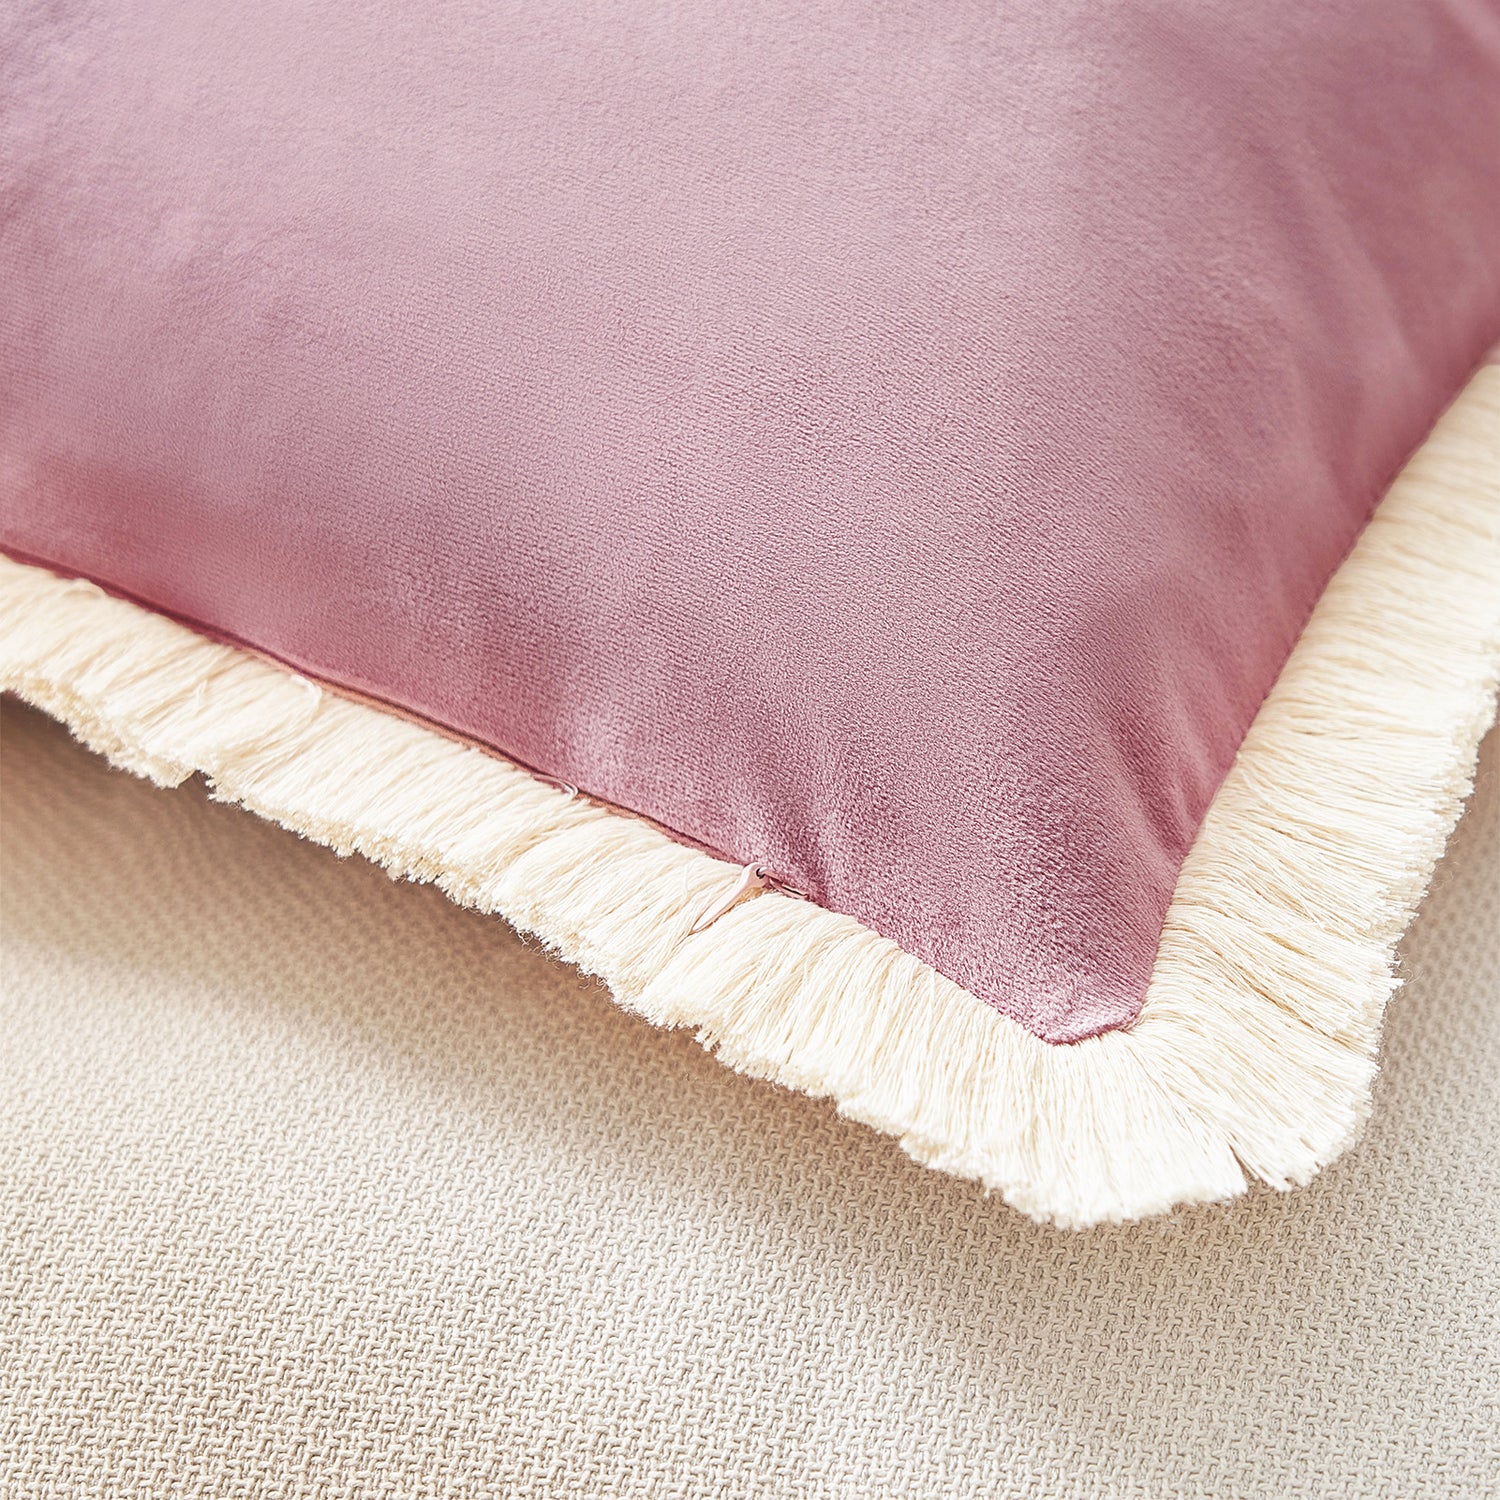 velvet decorative throw pillow covers  with fringe border set of 2 dusty pink color